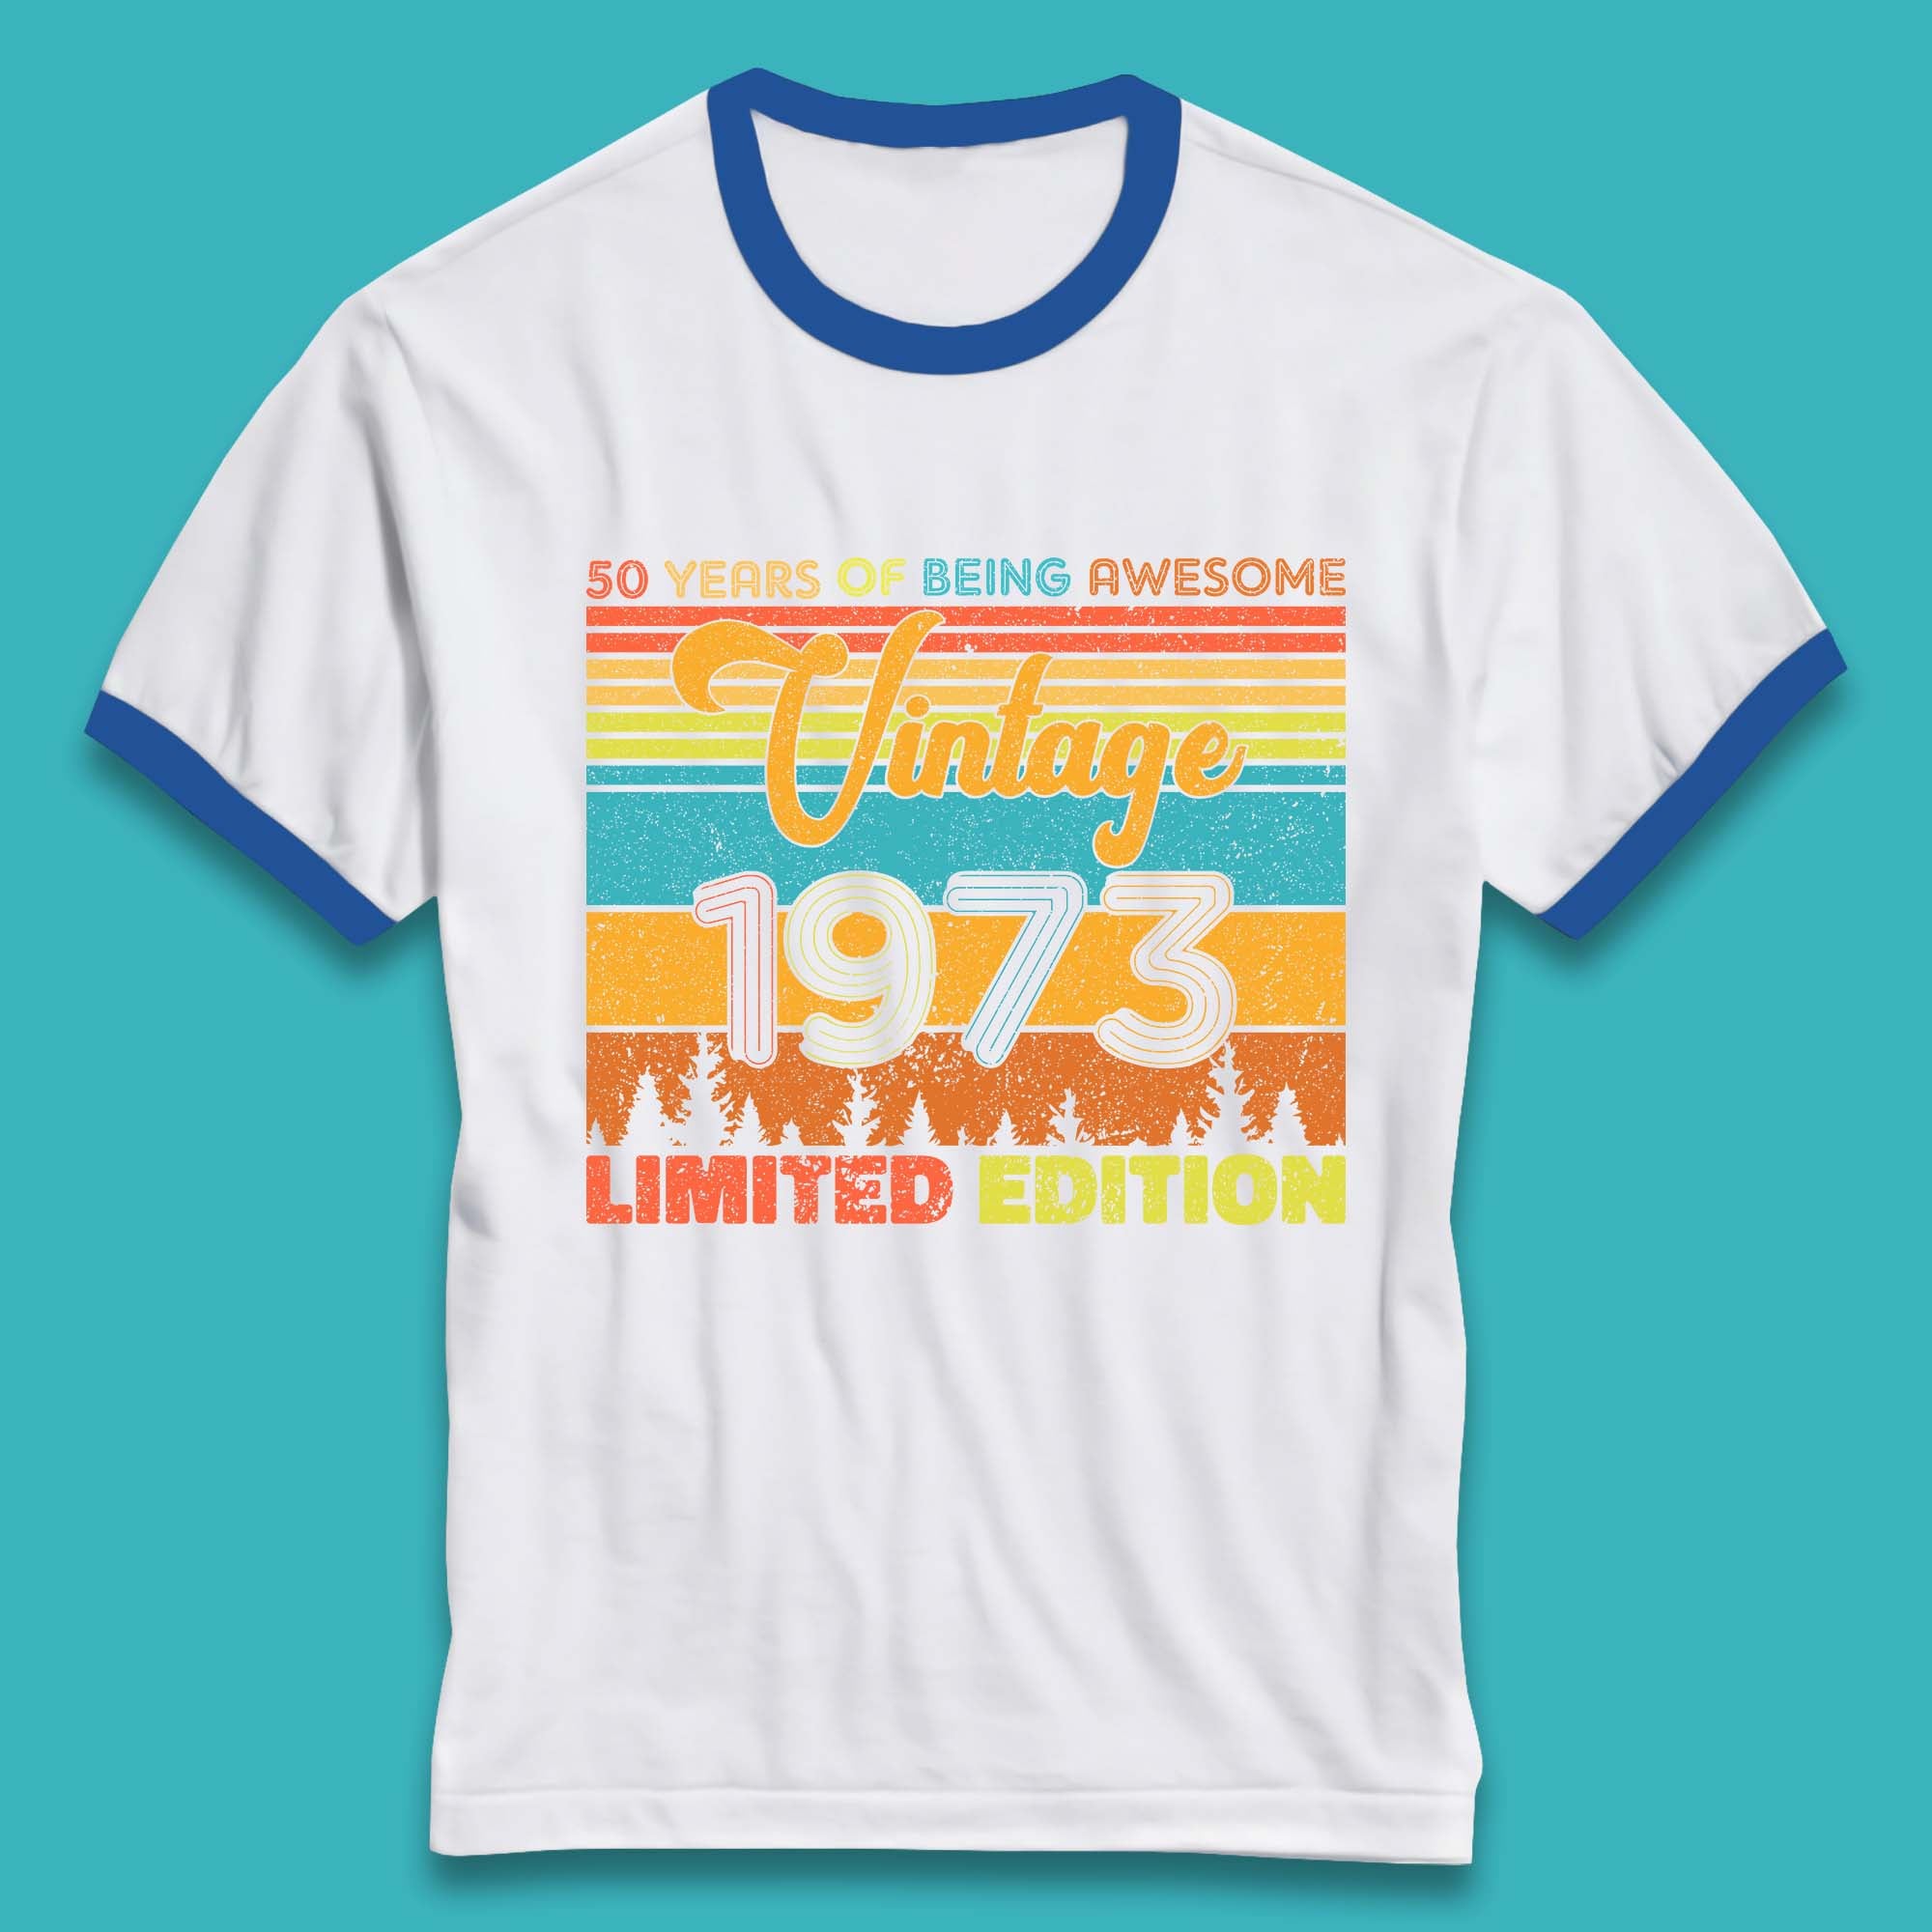 50 Years Of Being Awesome Vintage 1973 Limited Edition Vintage Retro 50th Birthday Ringer T Shirt